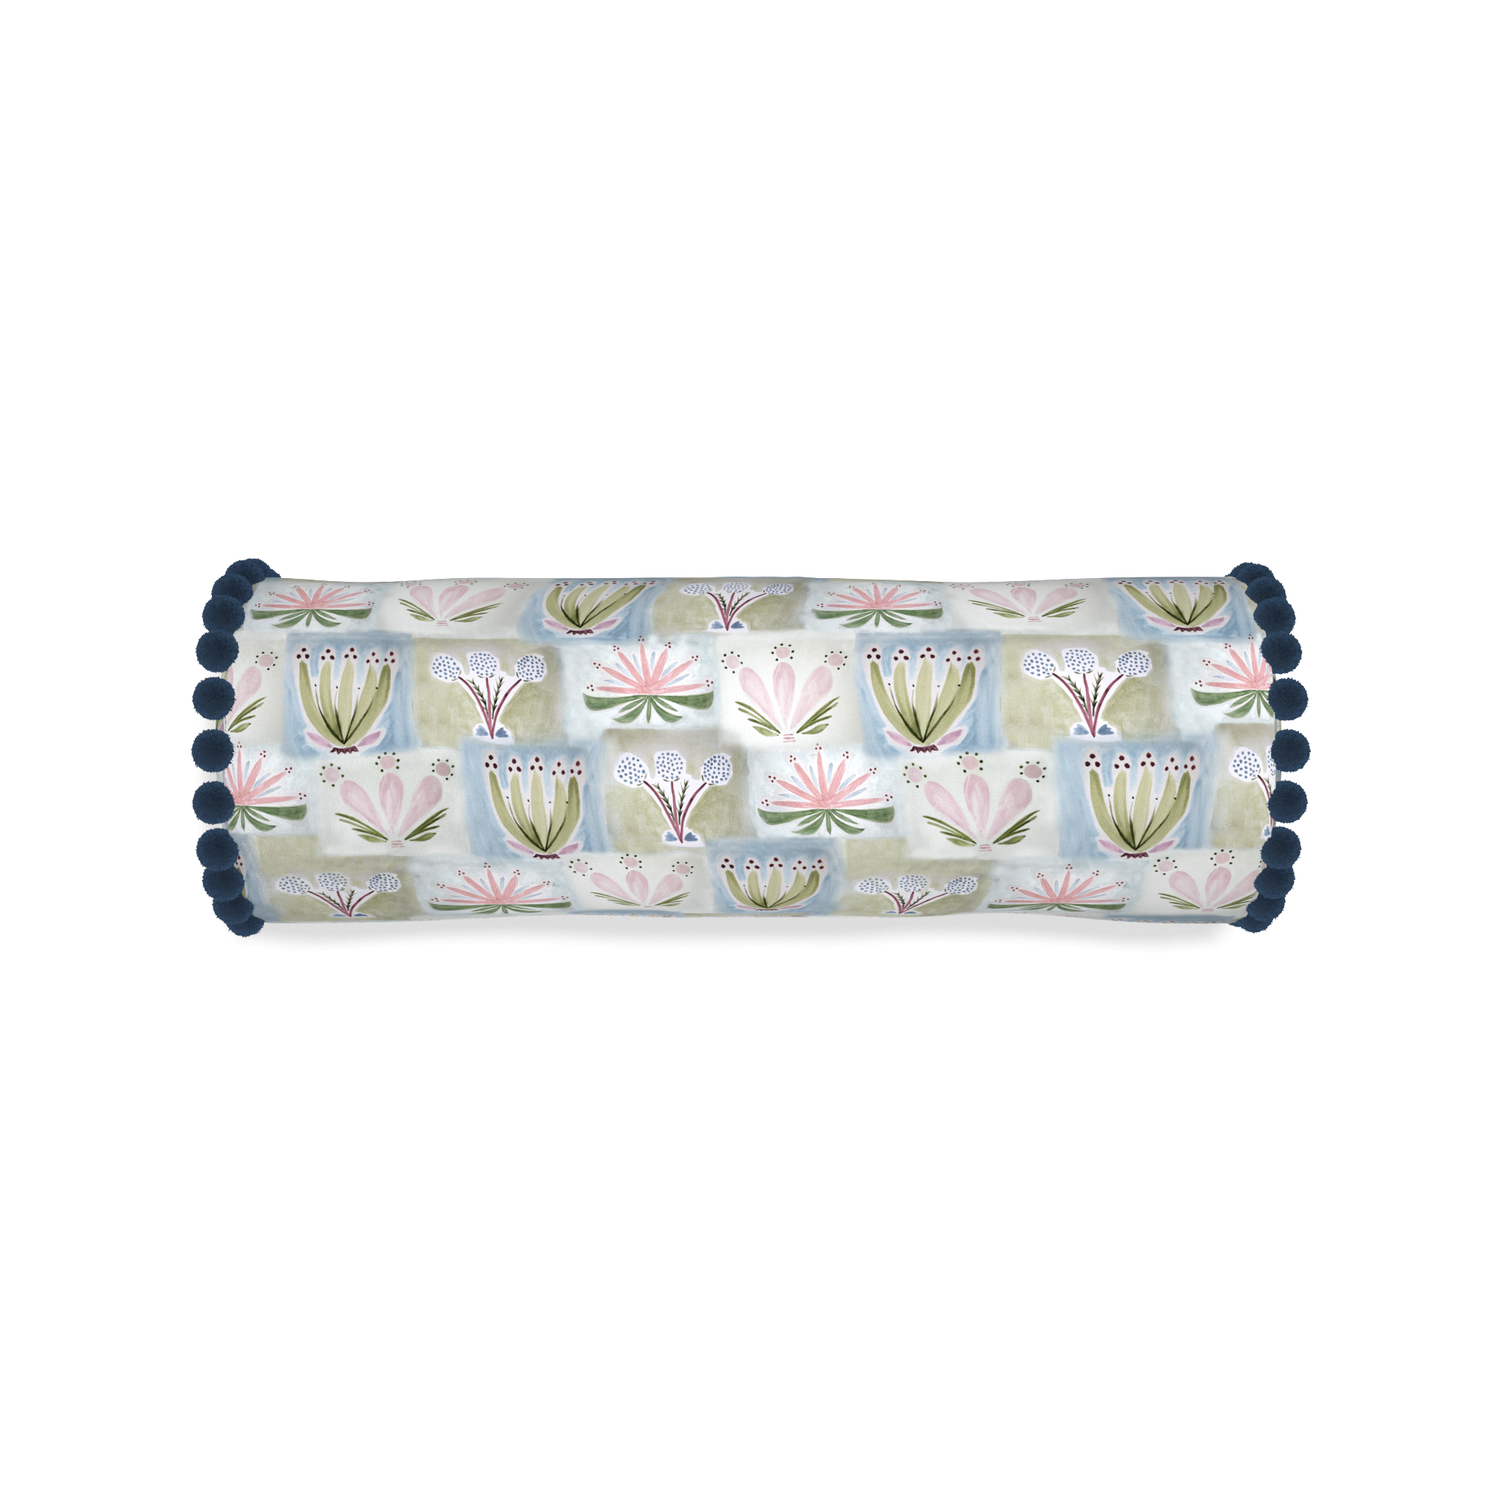 Bolster harper custom hand-painted floralpillow with c on white background